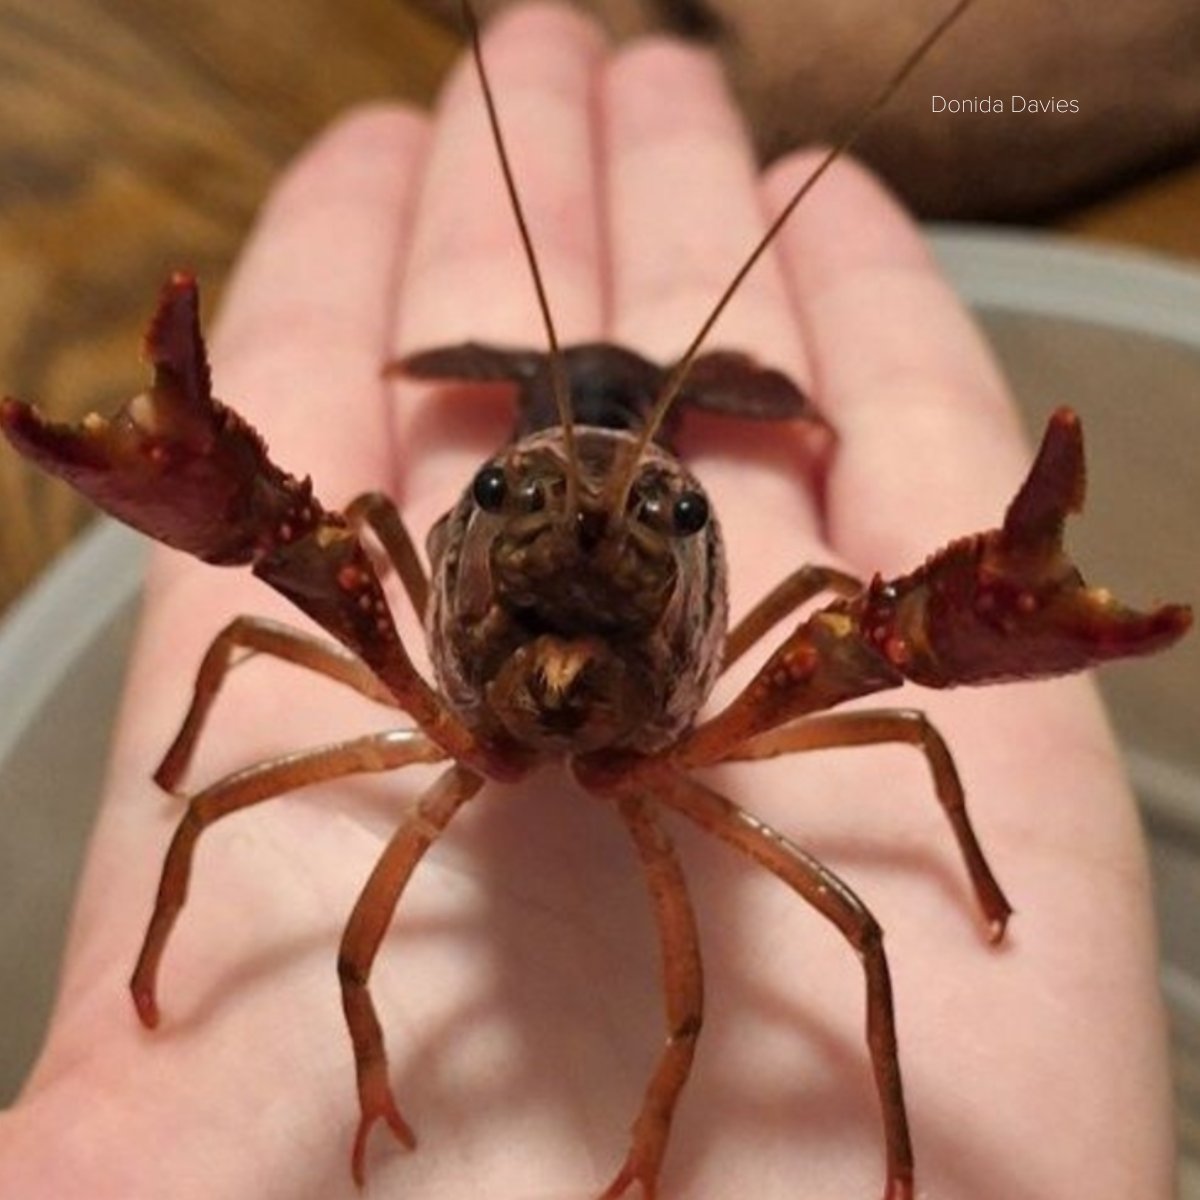 'His name is Nathan': Crustacean found walking down sidewalk in Mesa now a family pet | 12news.com/article/life/a…